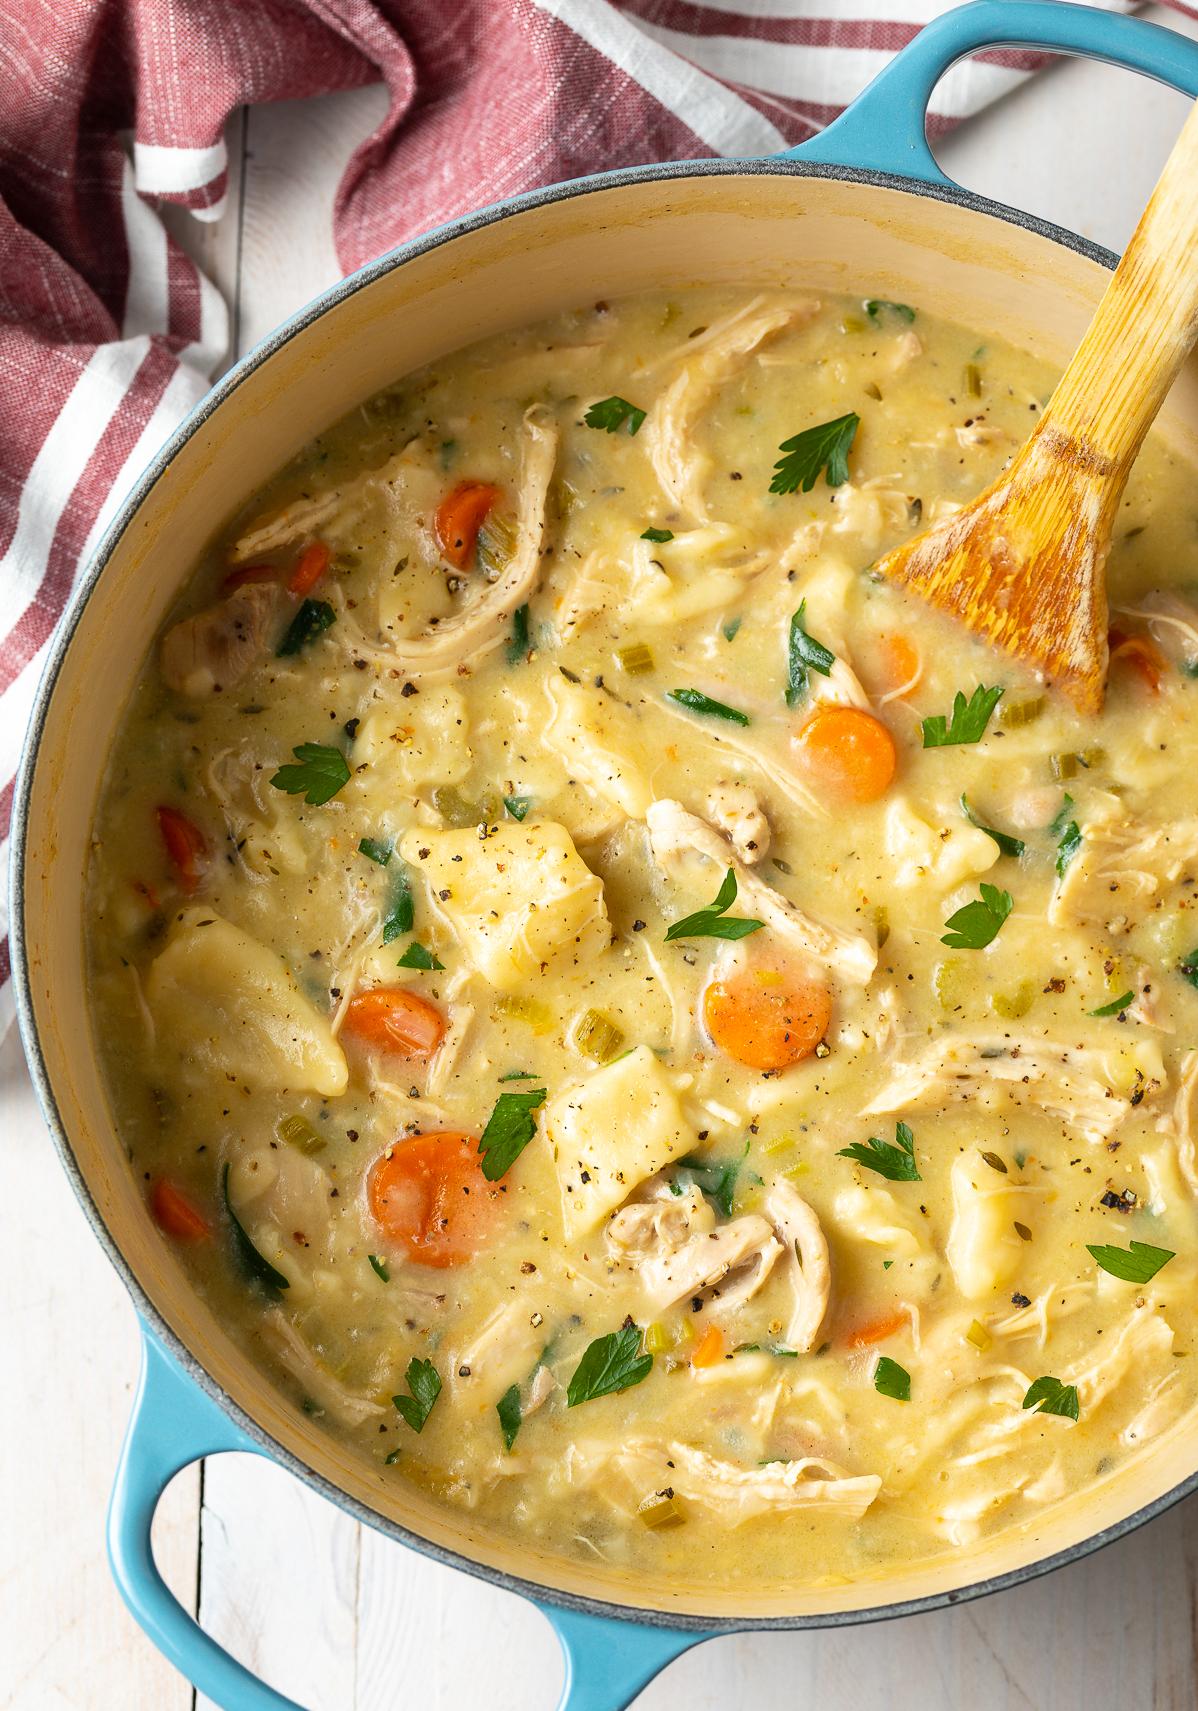  Dive into a Southern-style culinary experience with this Chicken and Dumplings recipe.